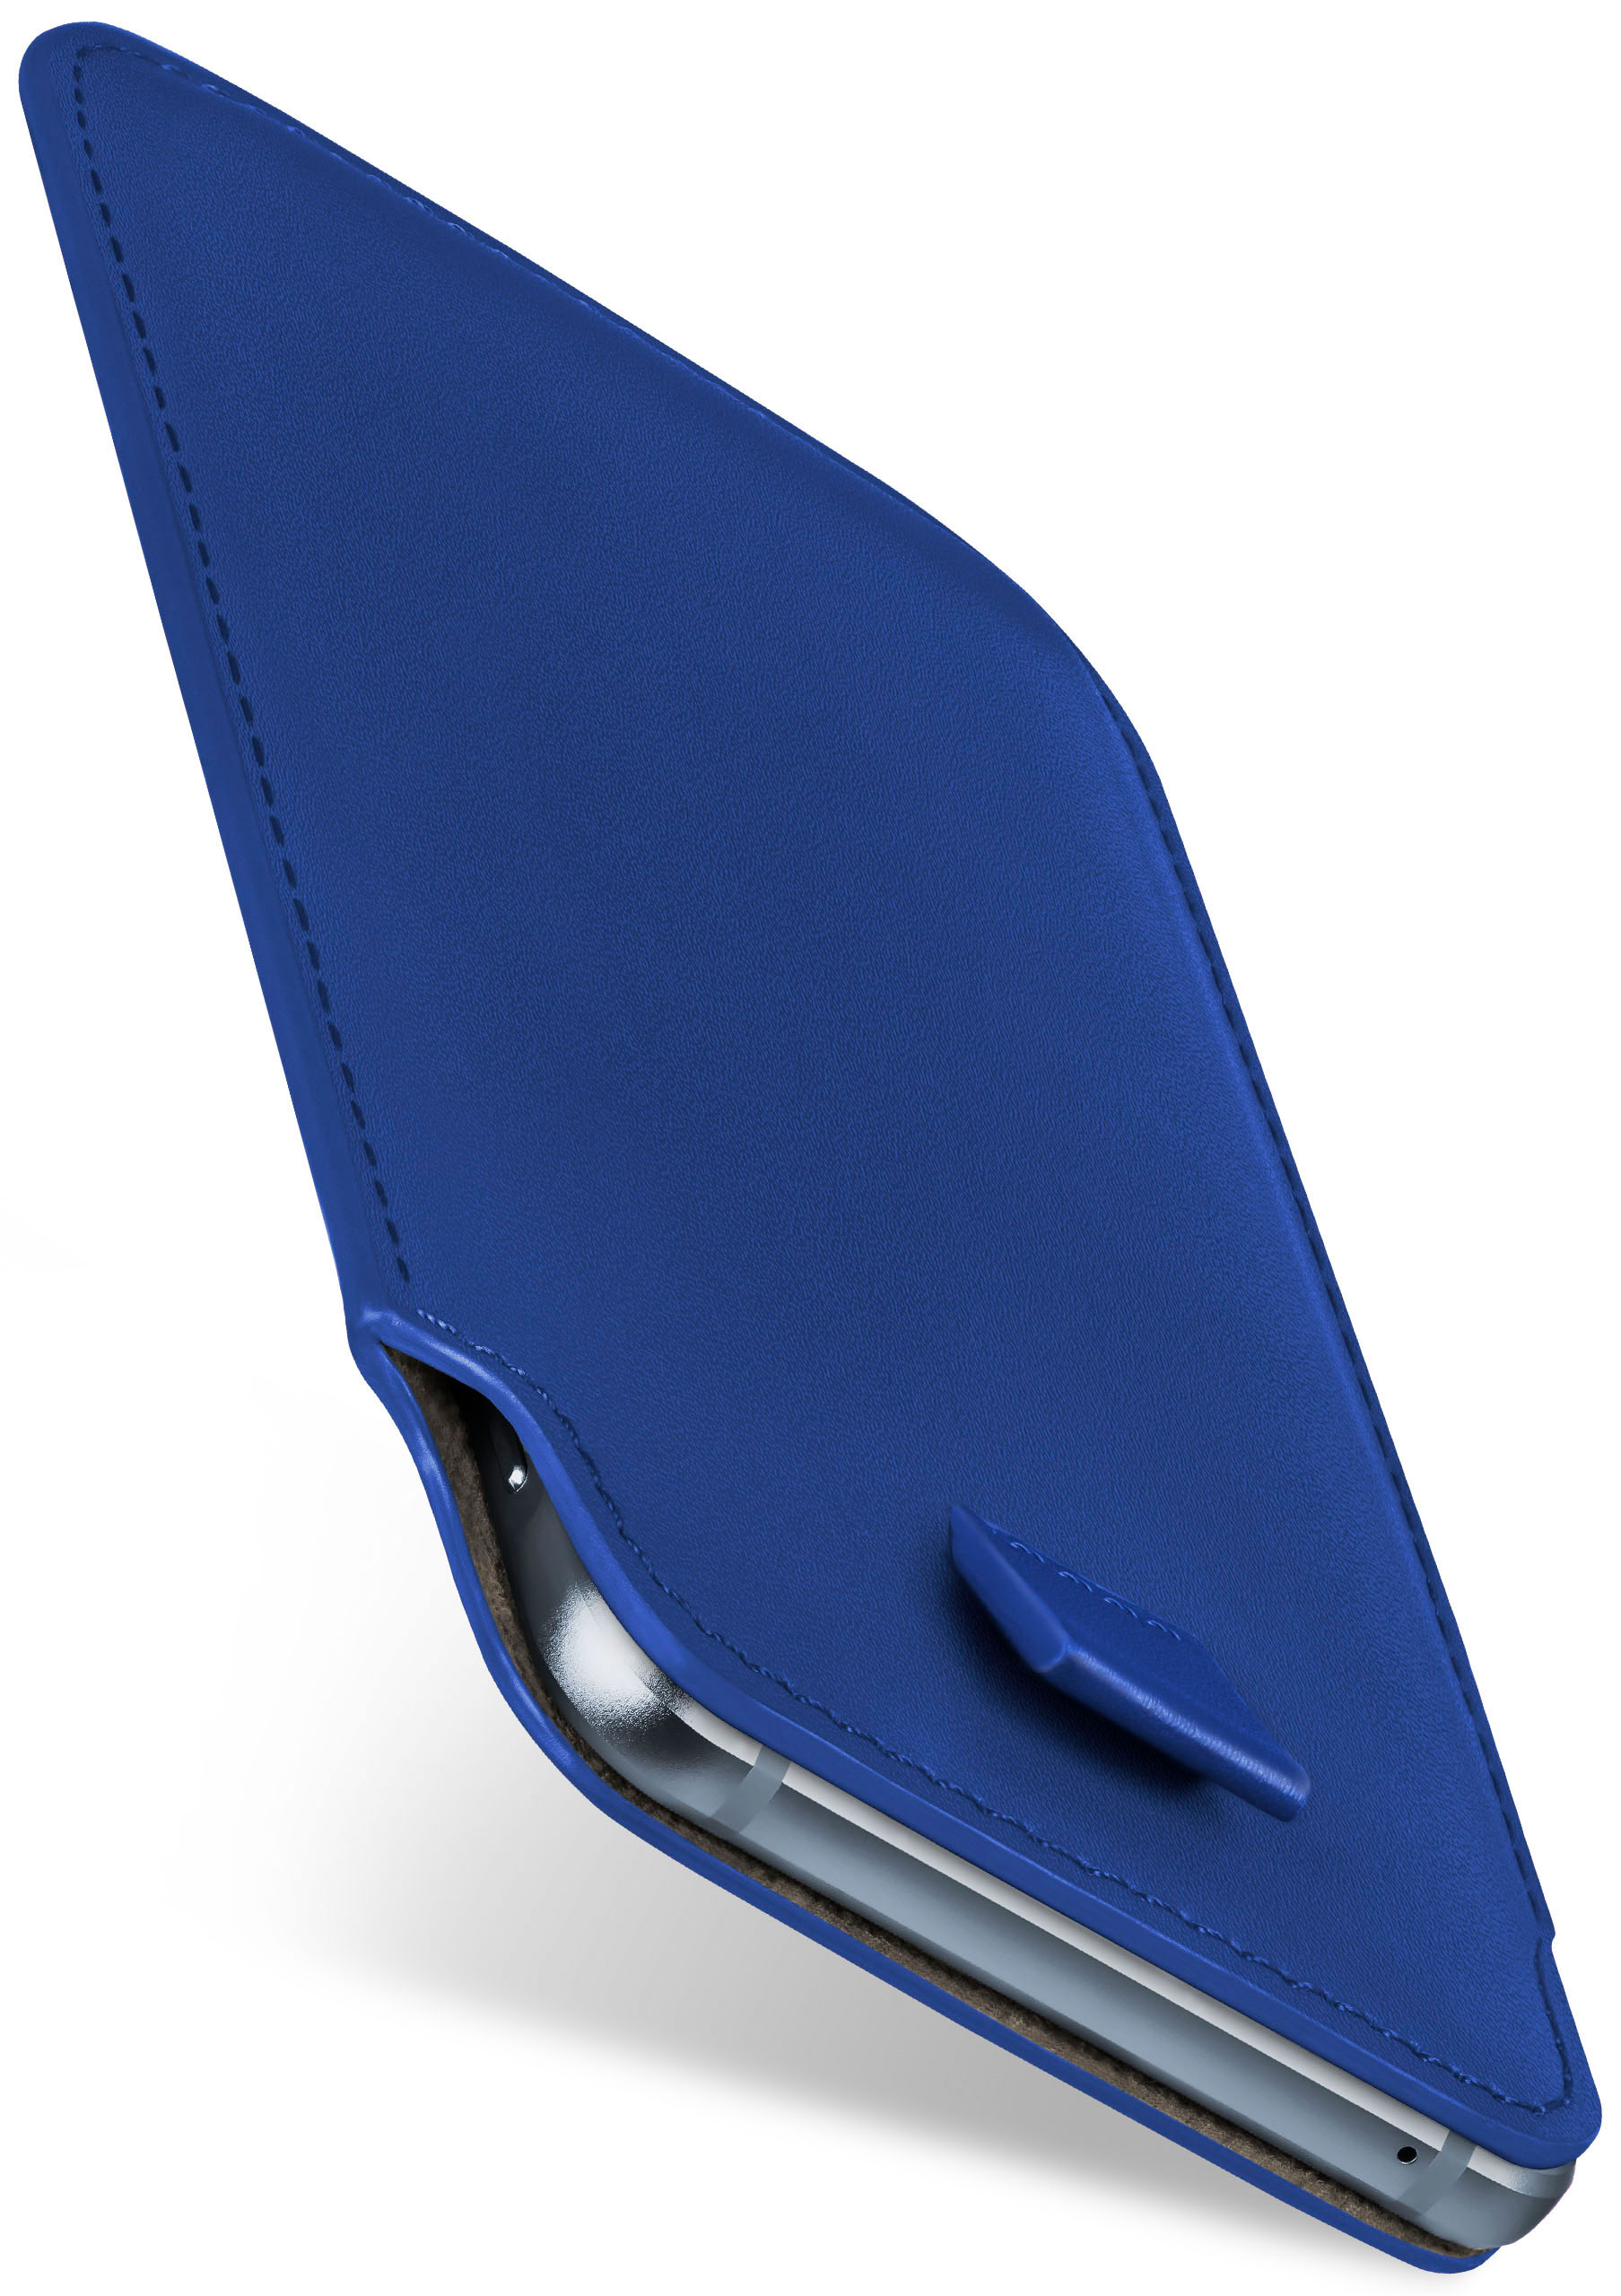 MOEX Slide Case, Full Cover, View2 Royal-Blue Wiko, Pro